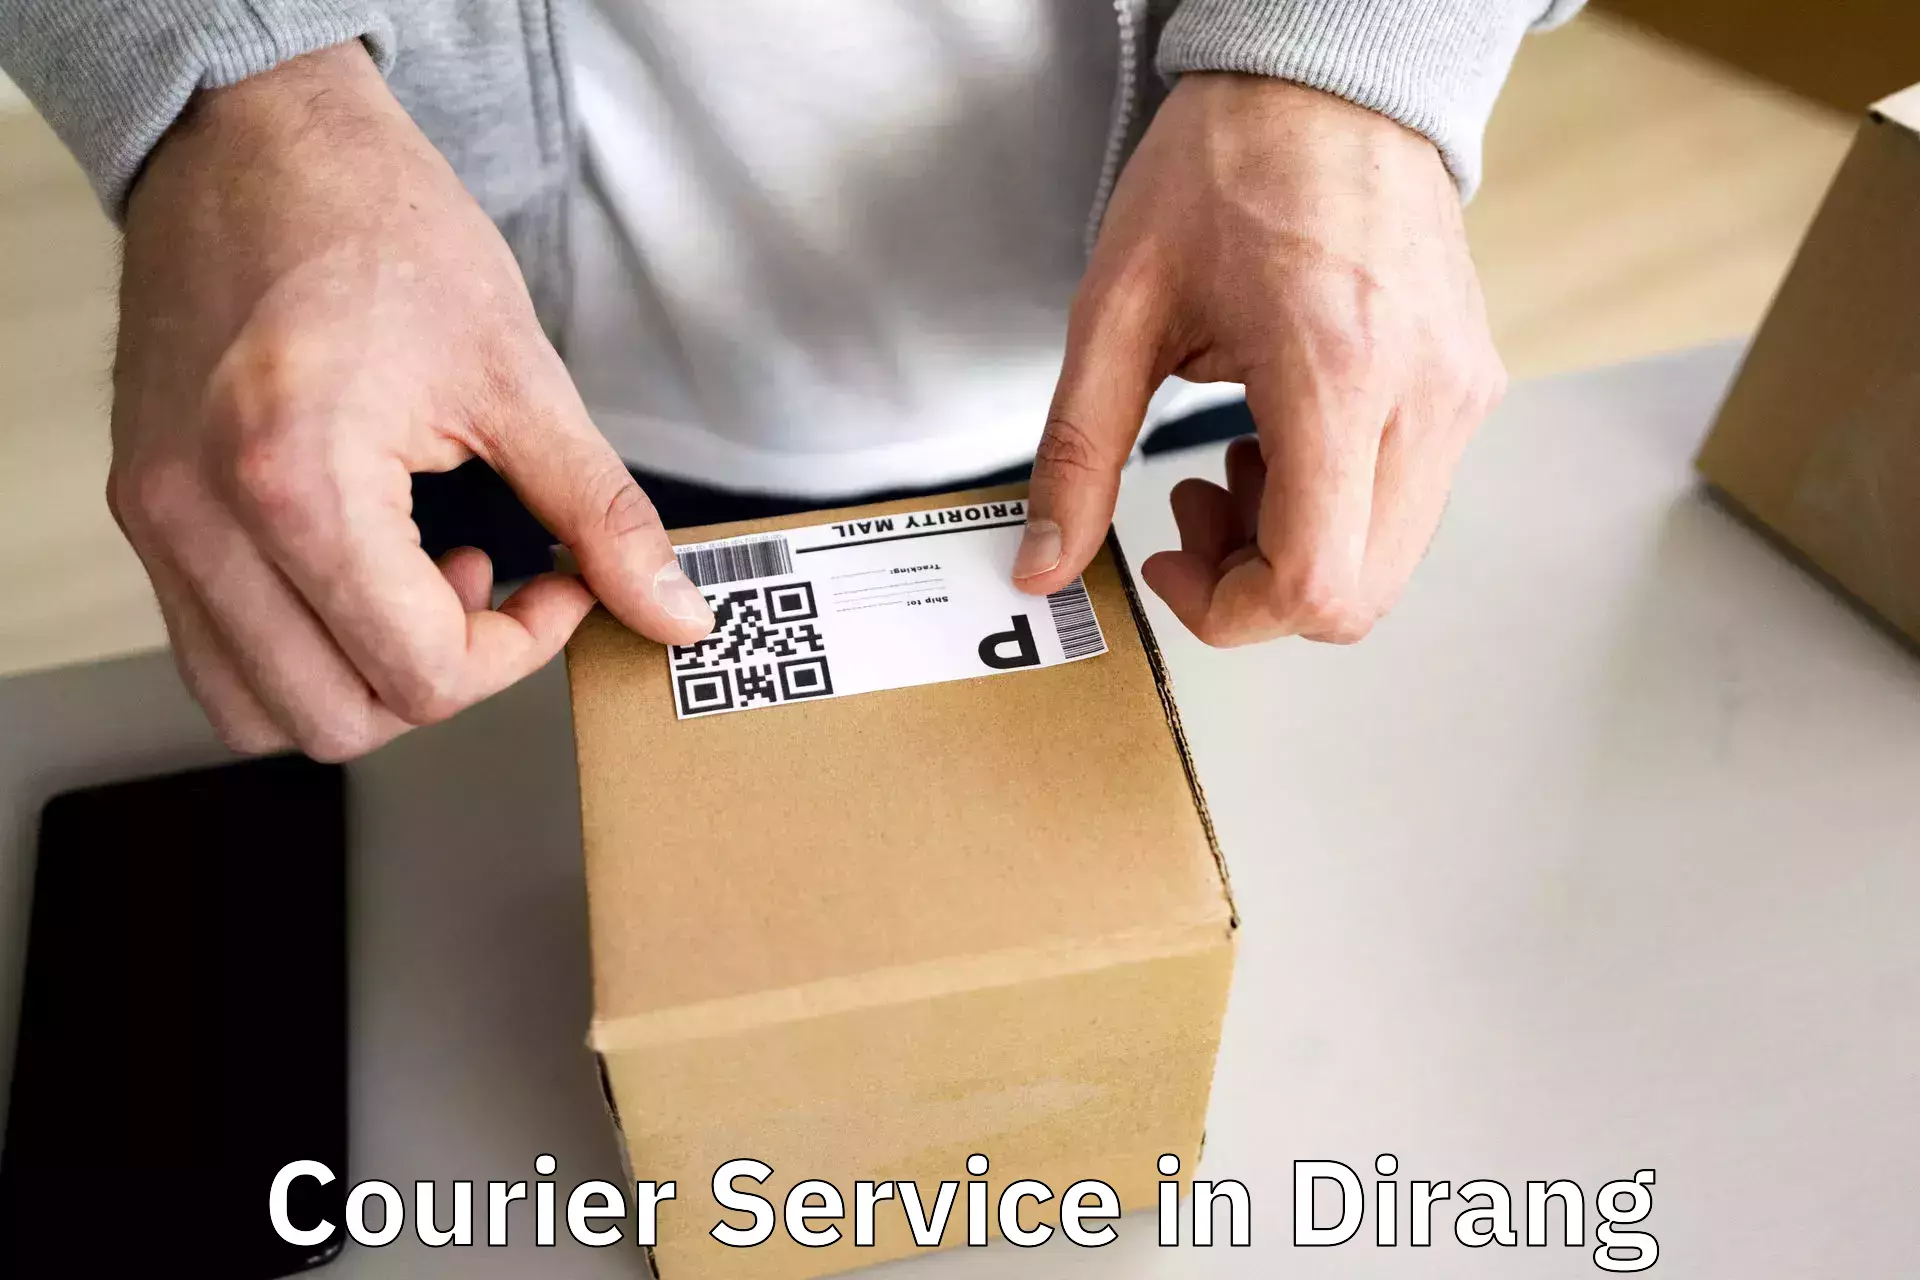 Express mail service in Dirang